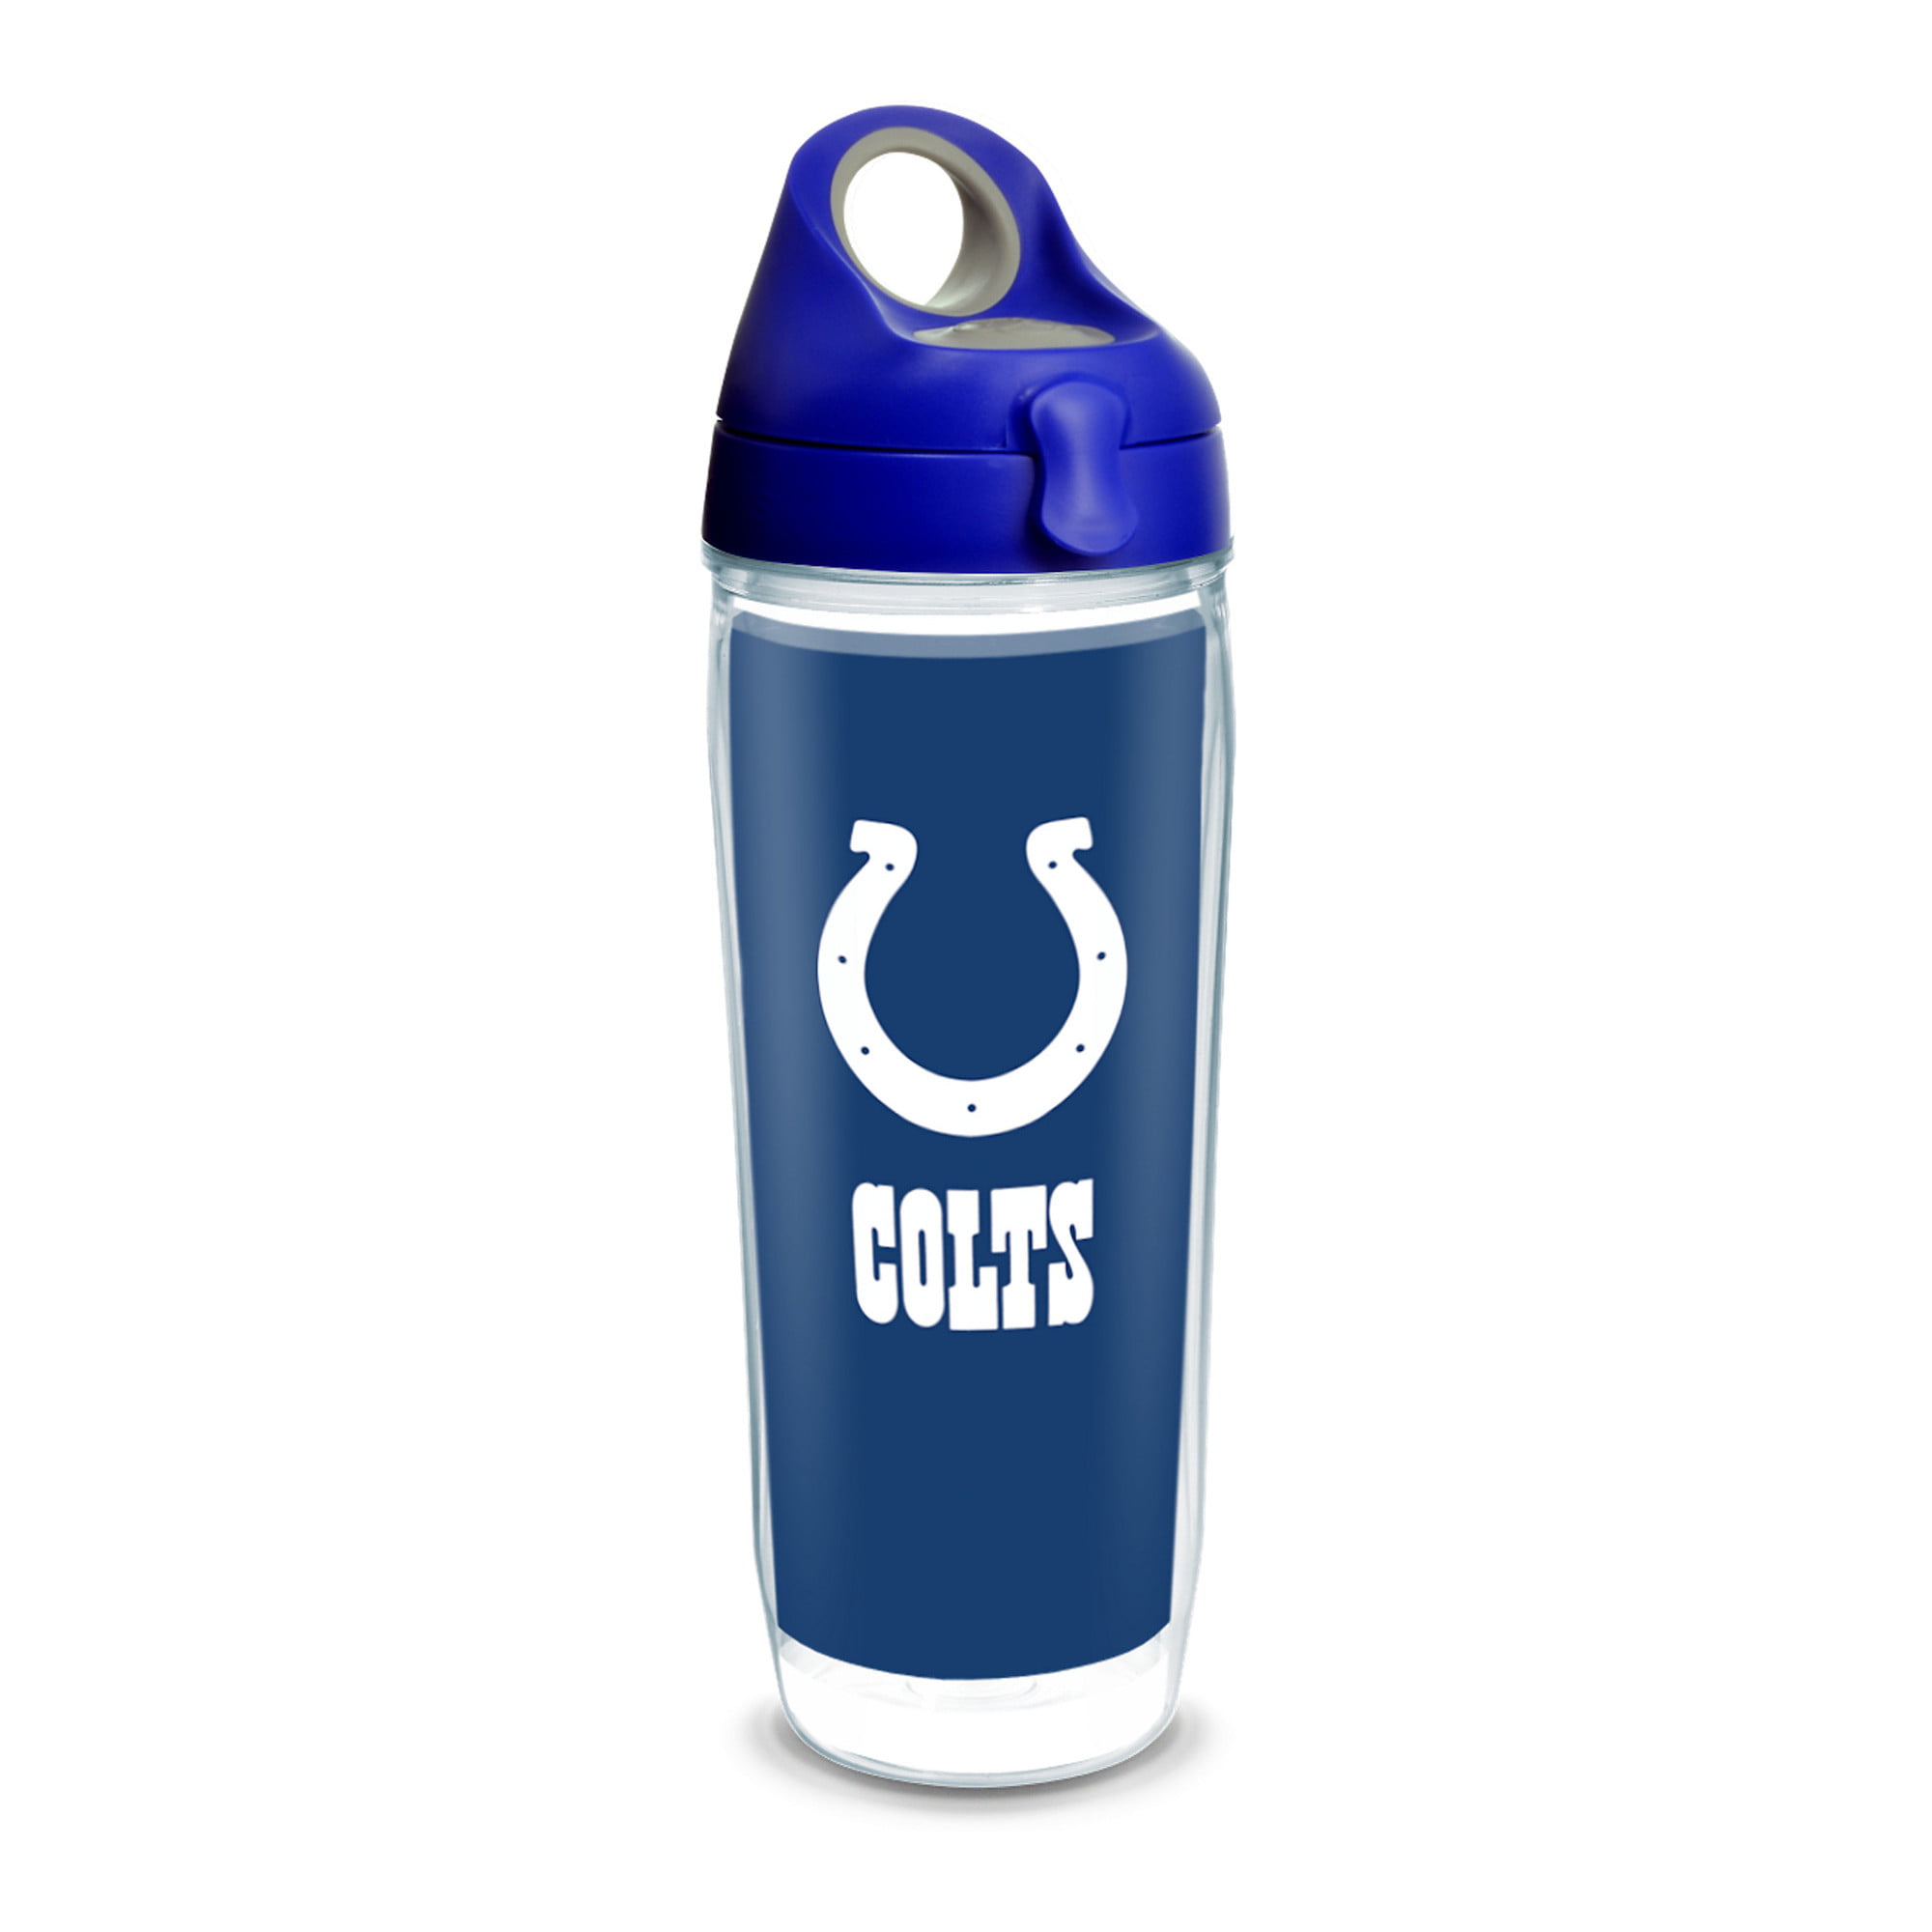 Indianapolis Colts Tervis Water Bottle